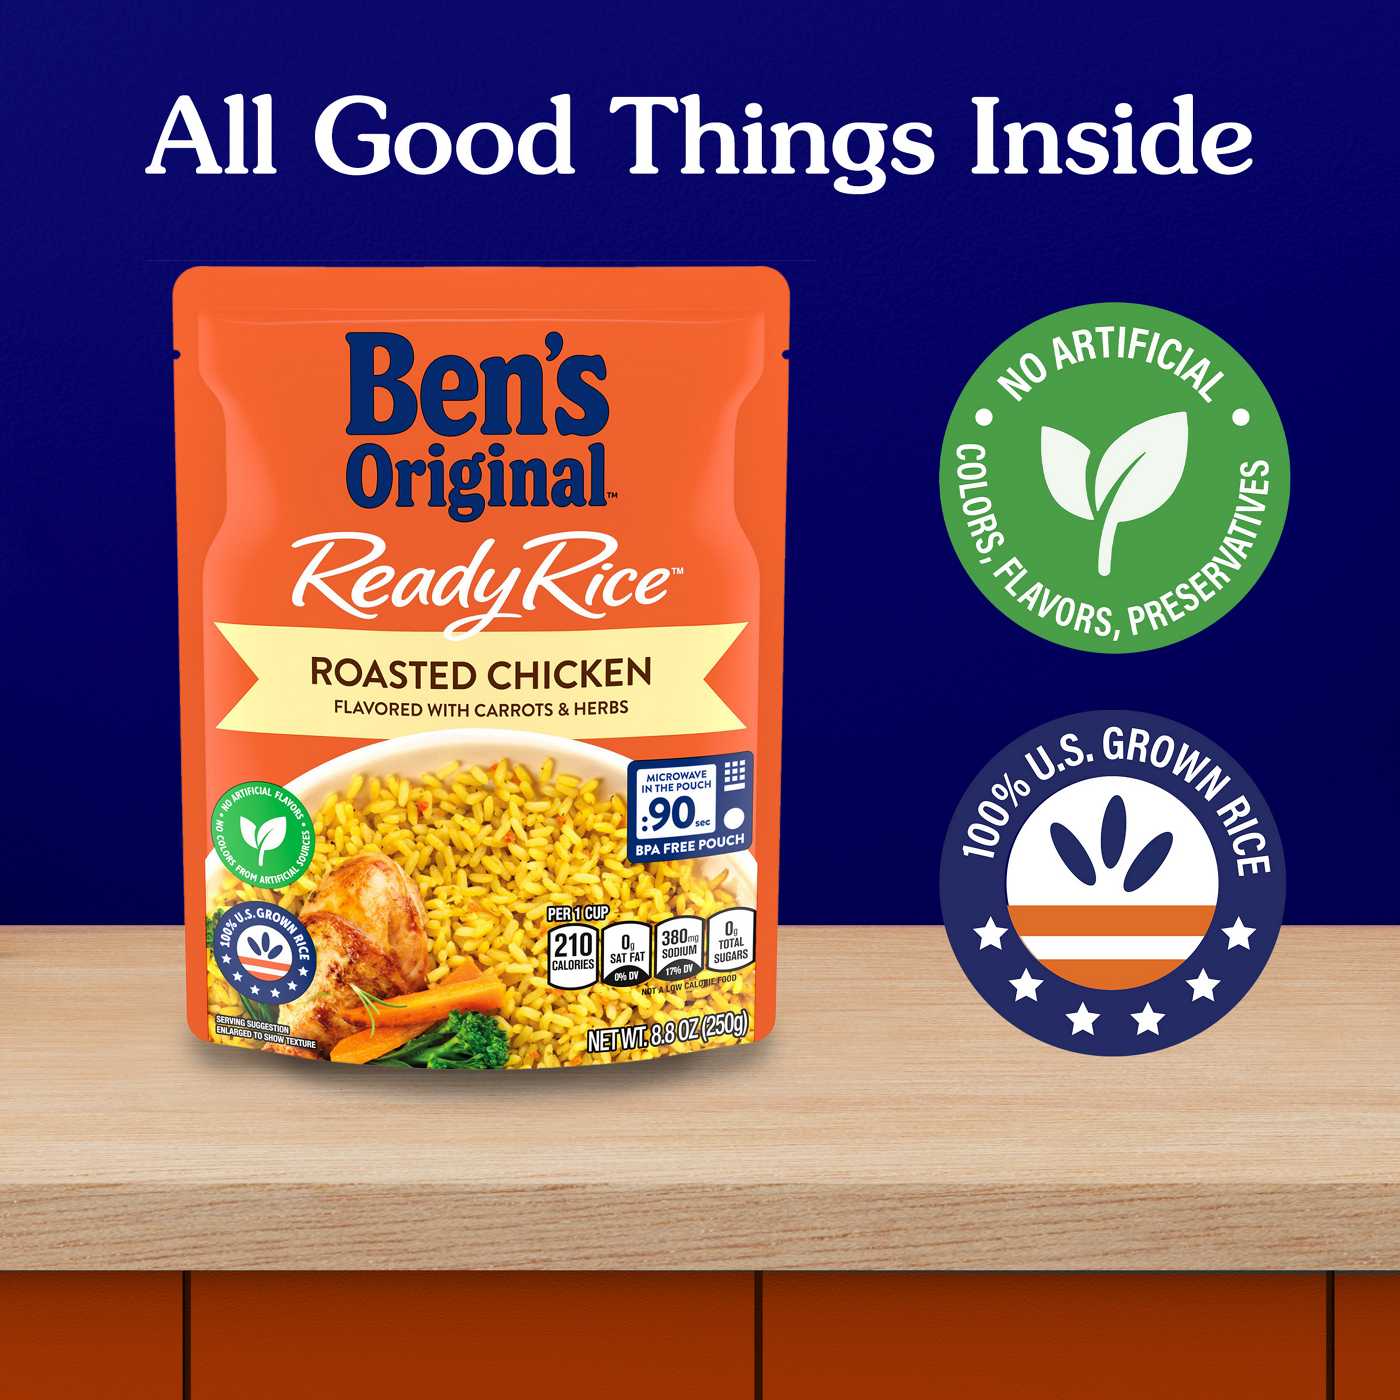 Ben's Original Ready Rice Roasted Chicken Flavored Rice; image 7 of 7